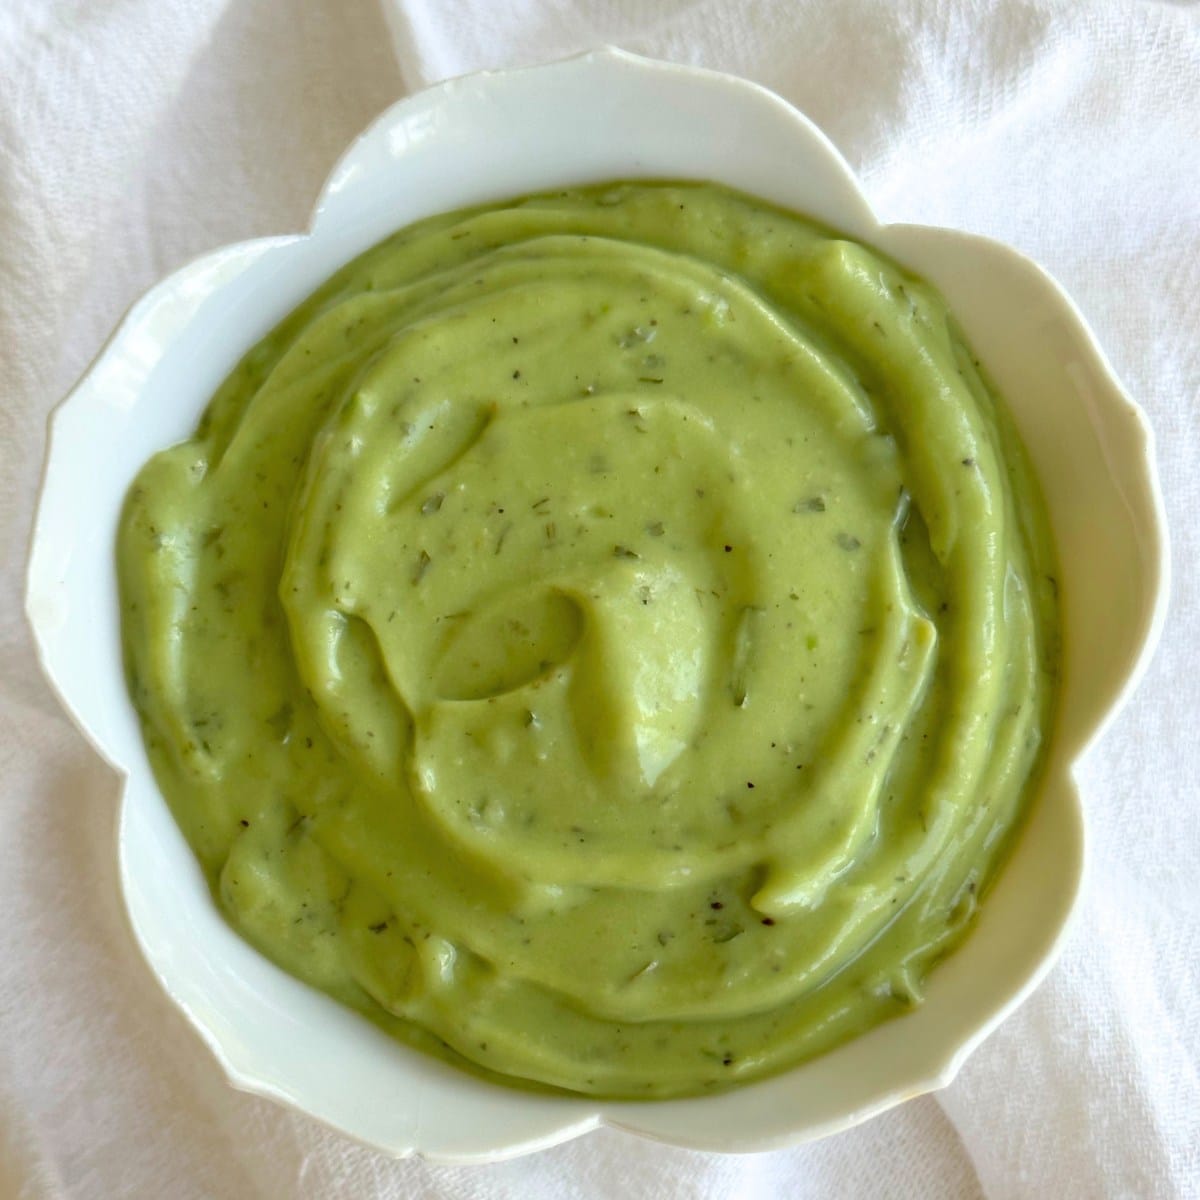 Bowl of vegan avocado ranch dressing with flecks of dairy-free ranch seasoning in creamy green sauce. Background is a white cloth.